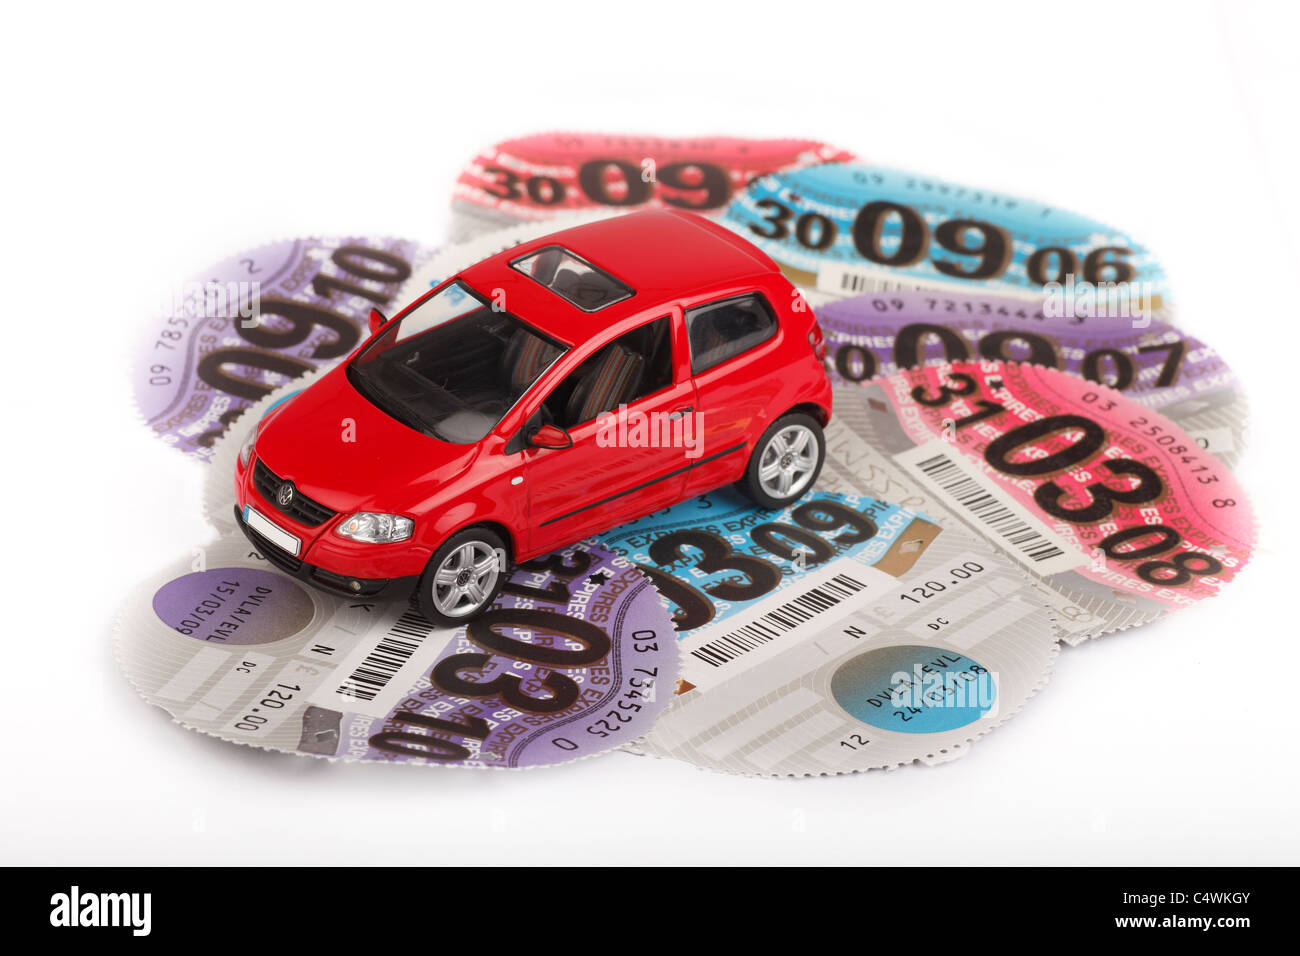 toy car and road tax disks UK Stock Photo